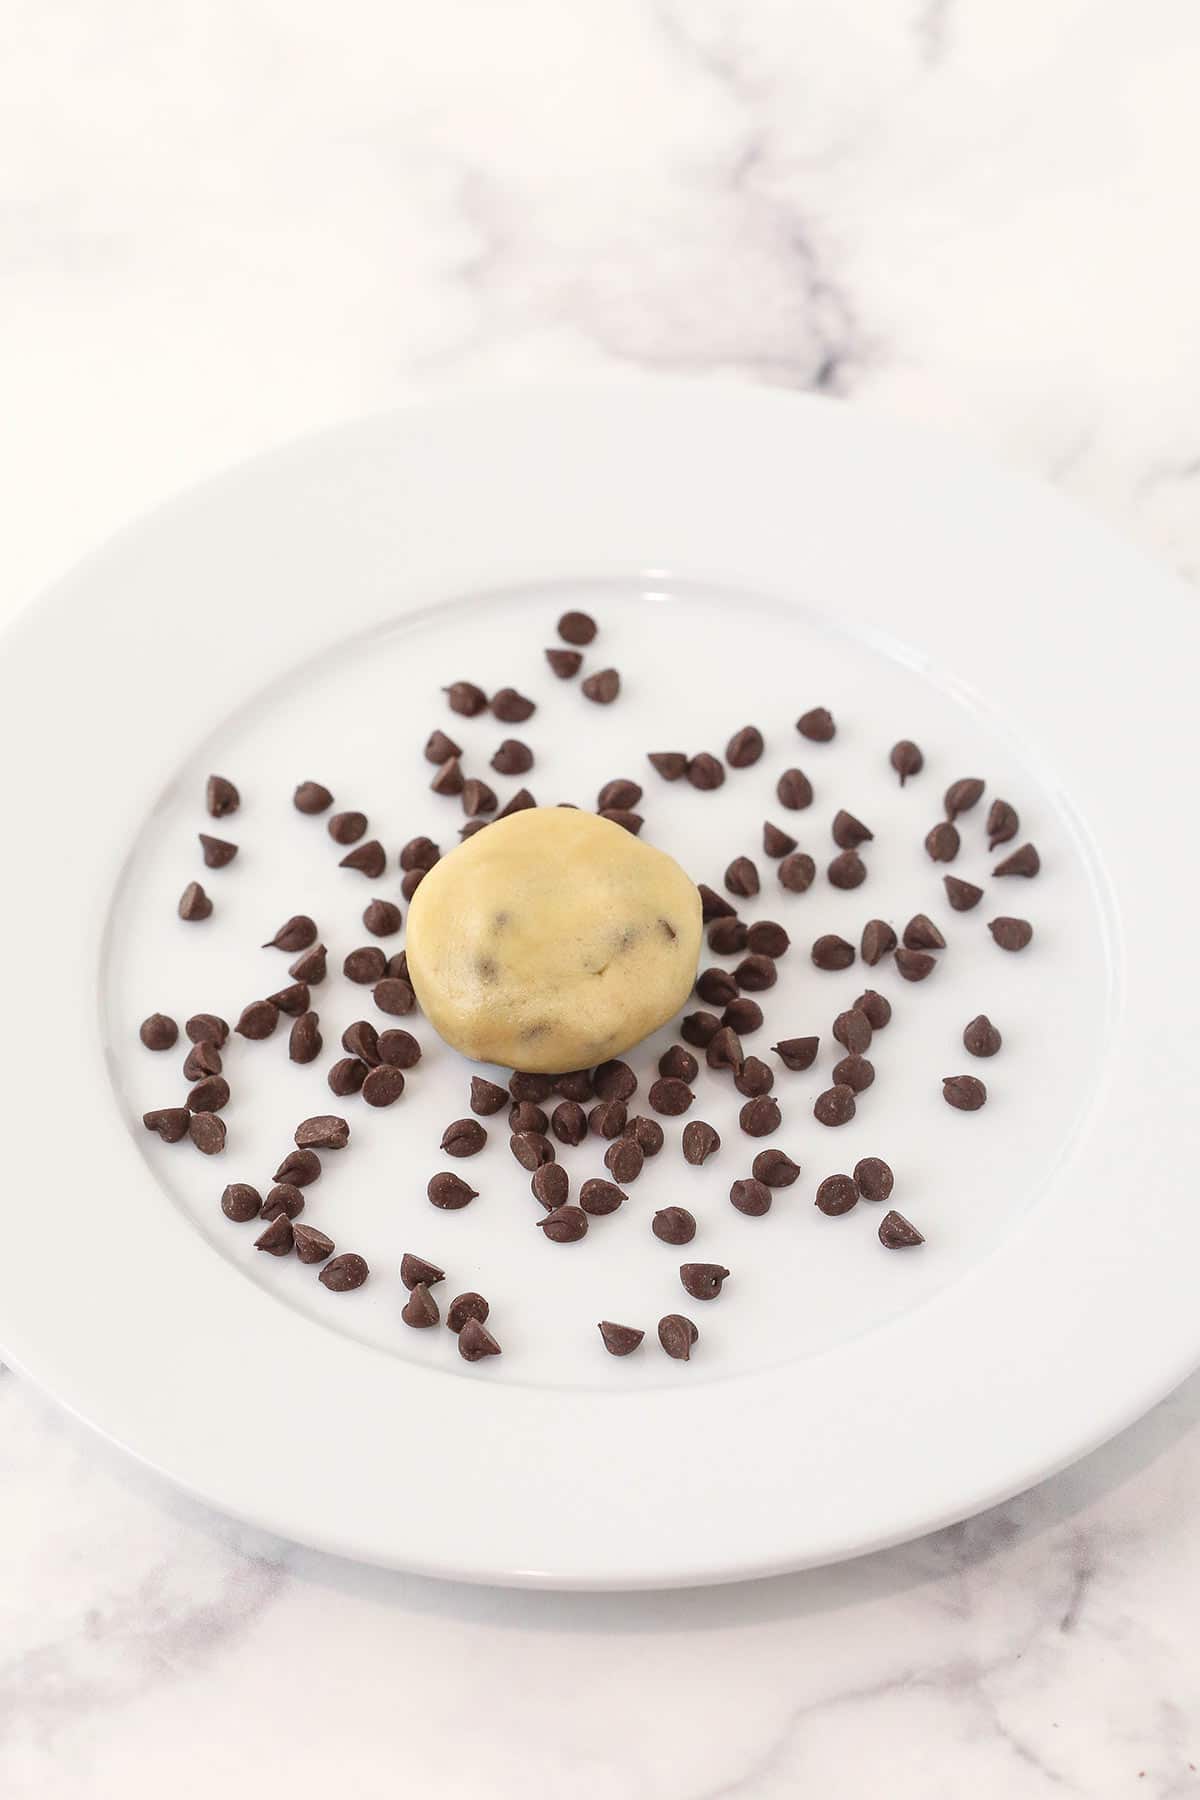 A ball of chocolate chip cookie dough being pressed into a few extra chocolate chips on a small plate